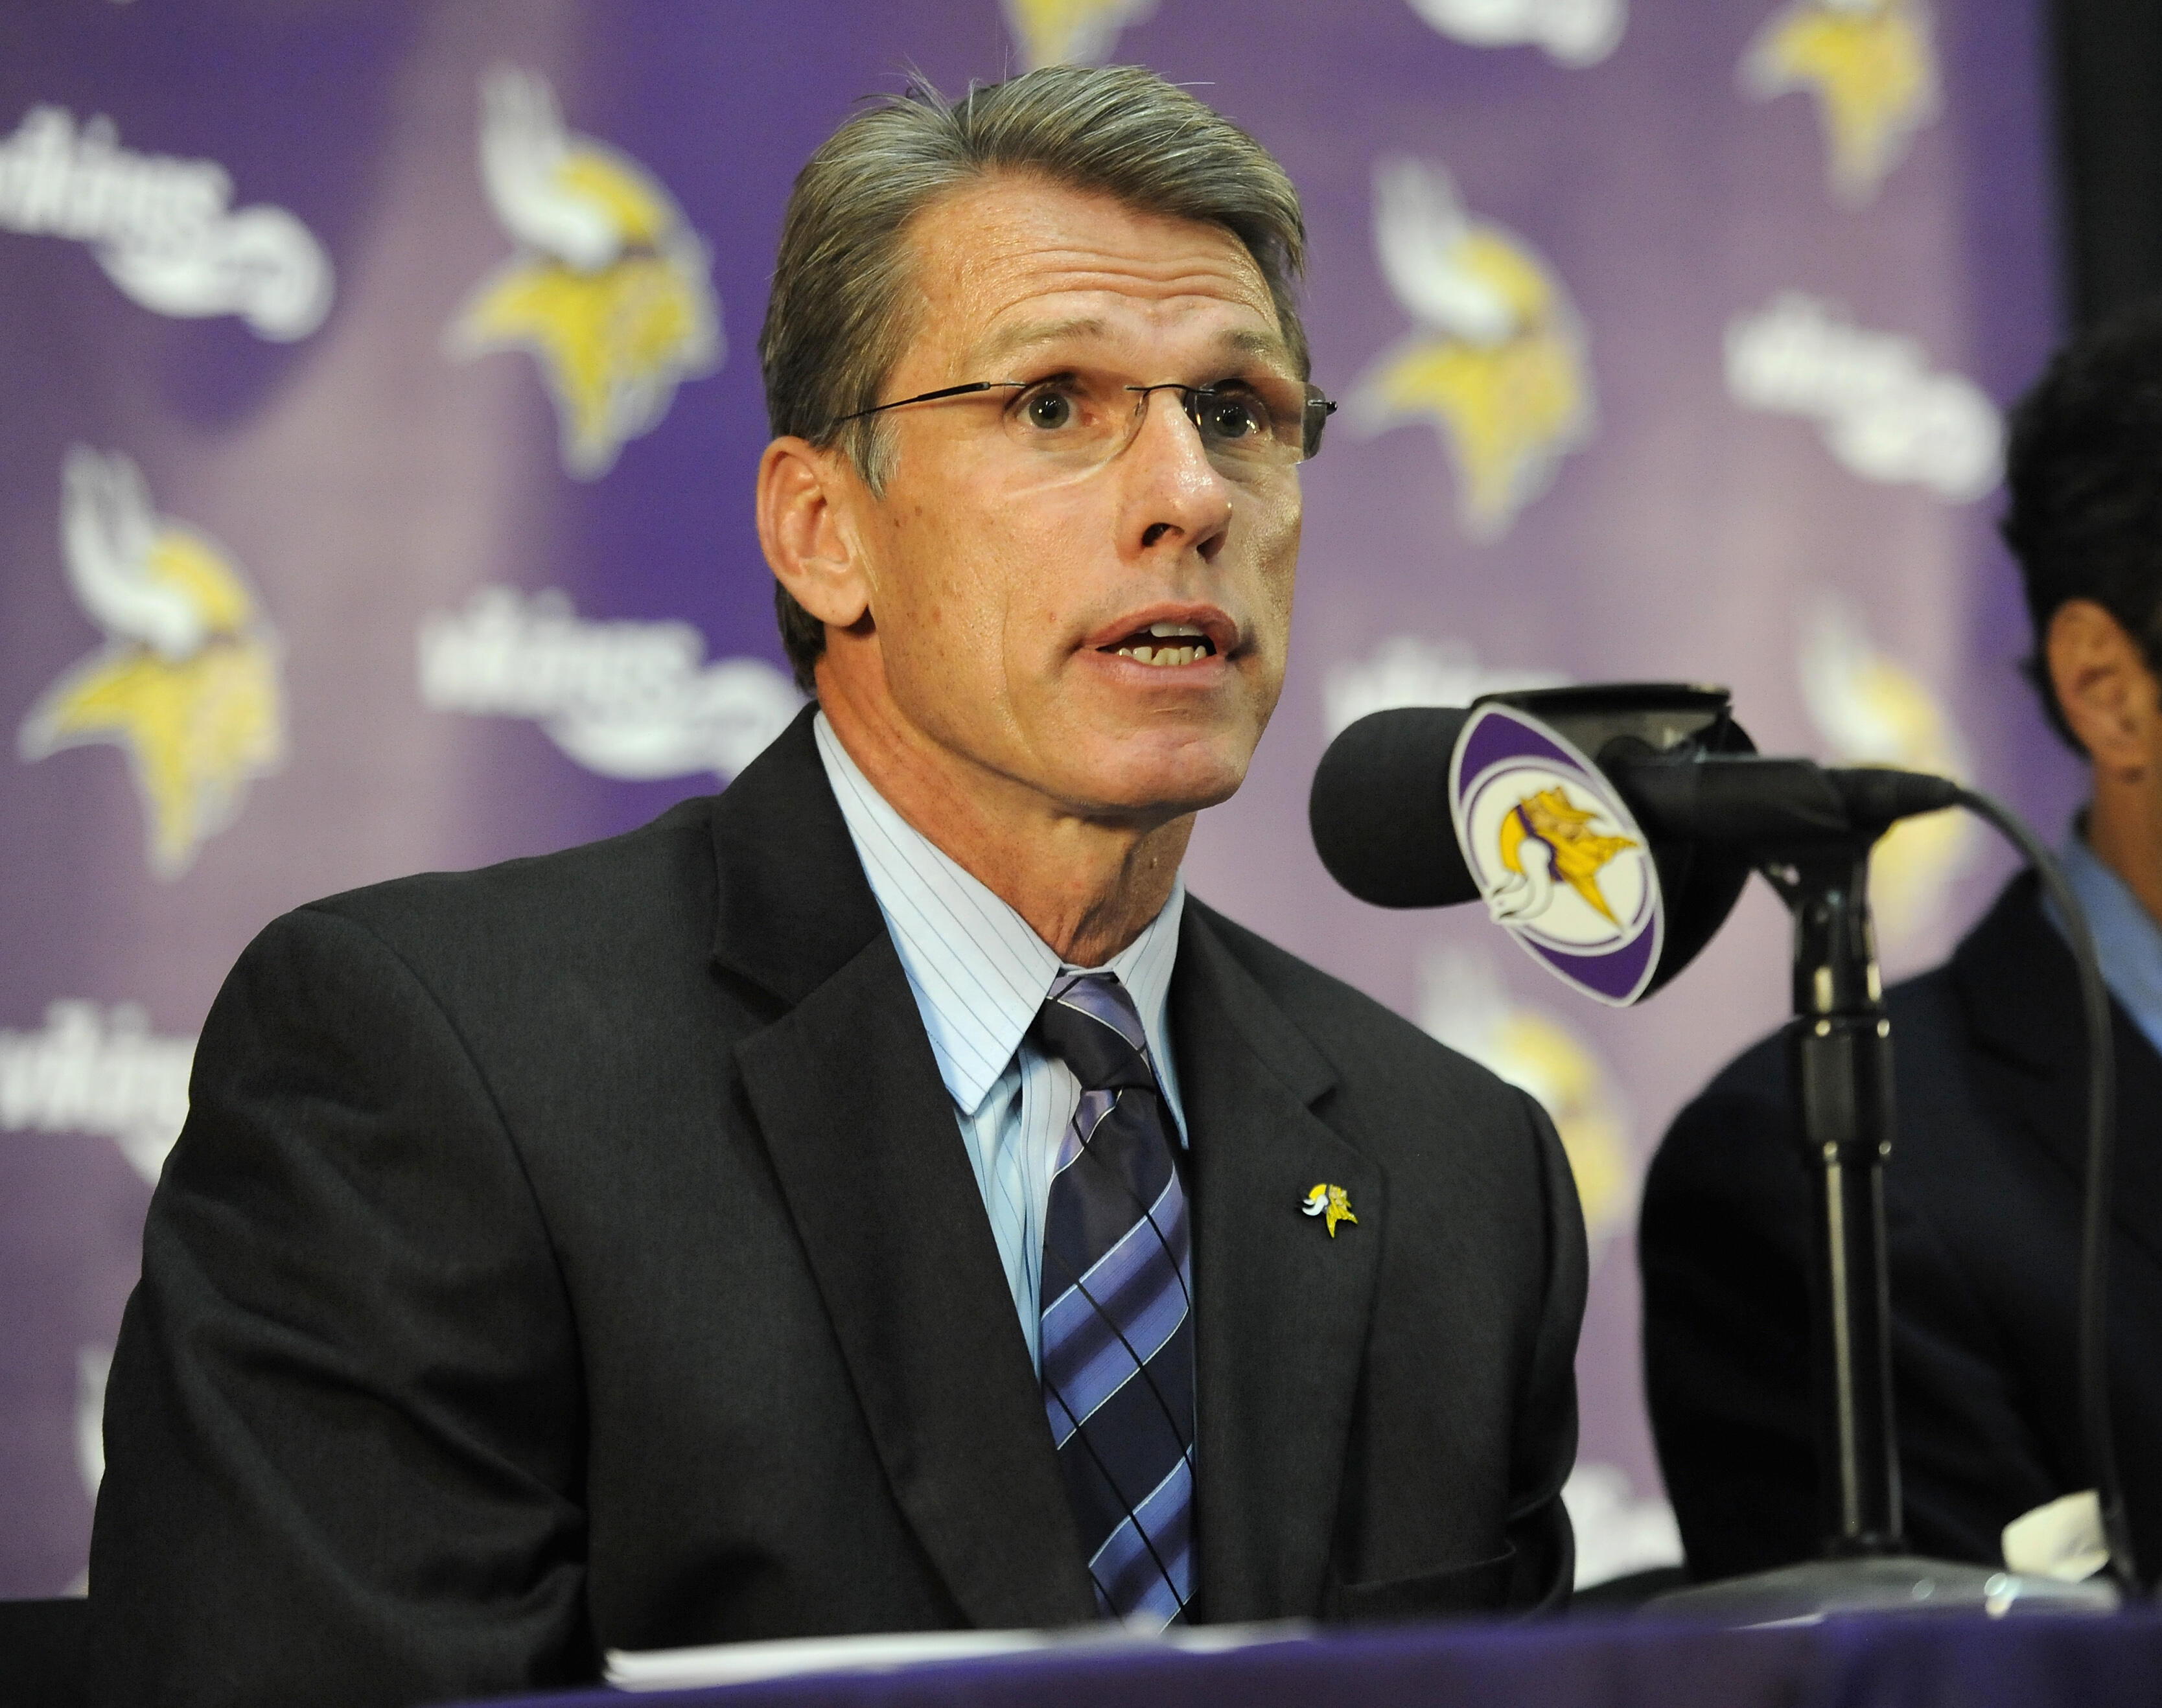 EDEN PRAIRIE, MN - SEPTEMBER 17: General Manager Rick Spielman of the Minnesota Vikings speaks to the media during a press conference on September 17, 2014 at Winter Park in Eden Prairie, Minnesota. The Vikings addressed their decision to put Adrian Peter